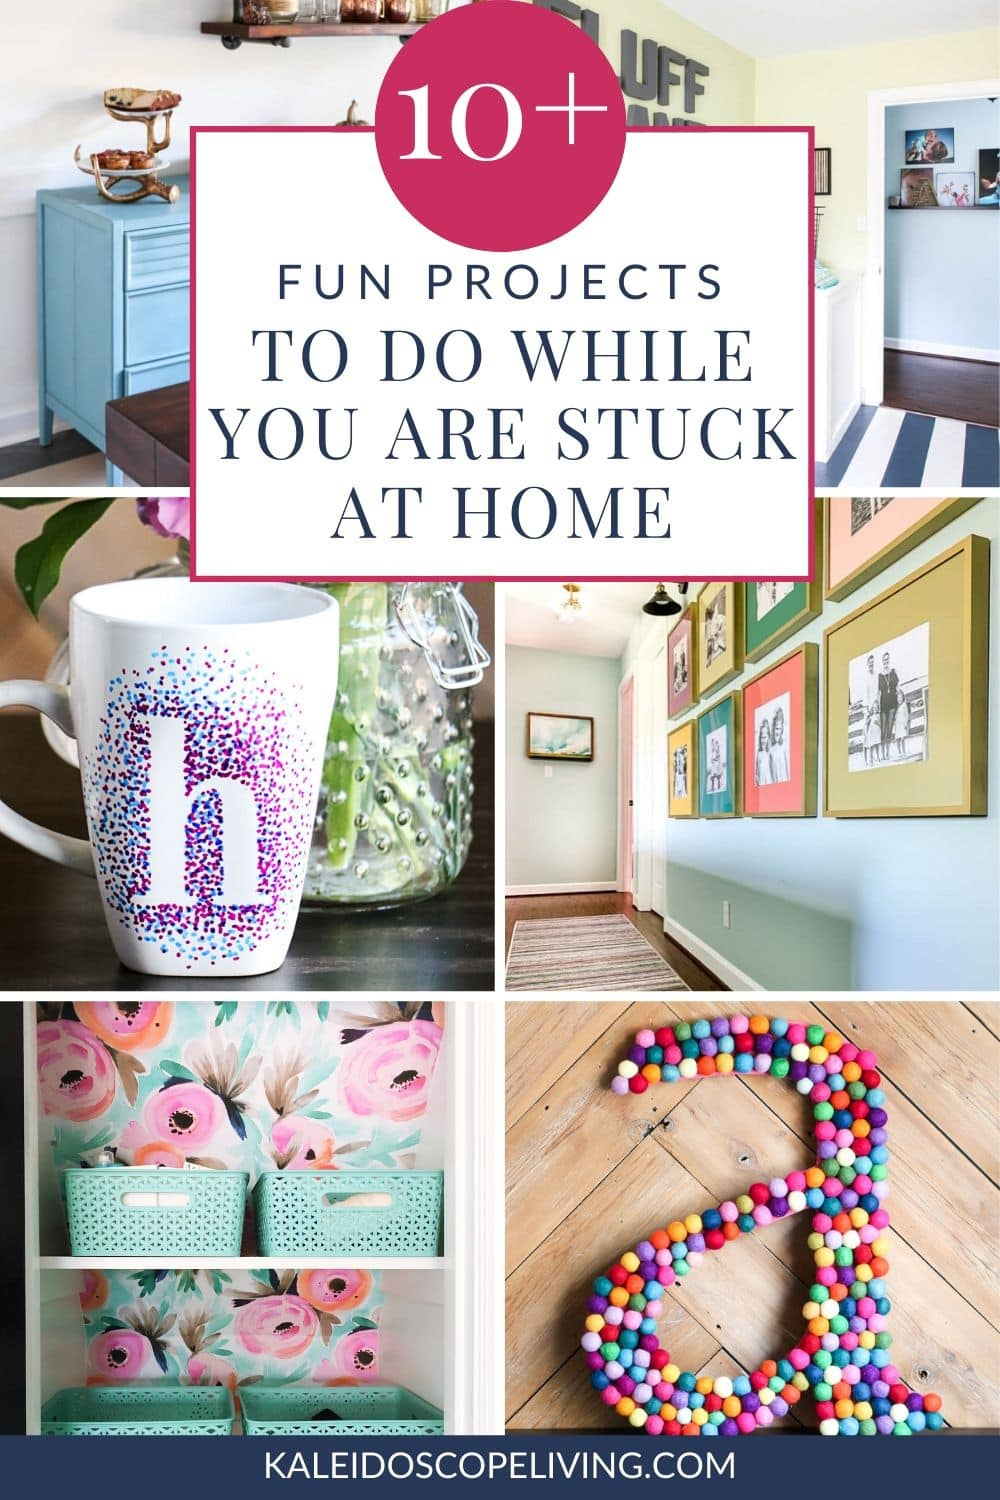 18 diy projects for the home easy ideas